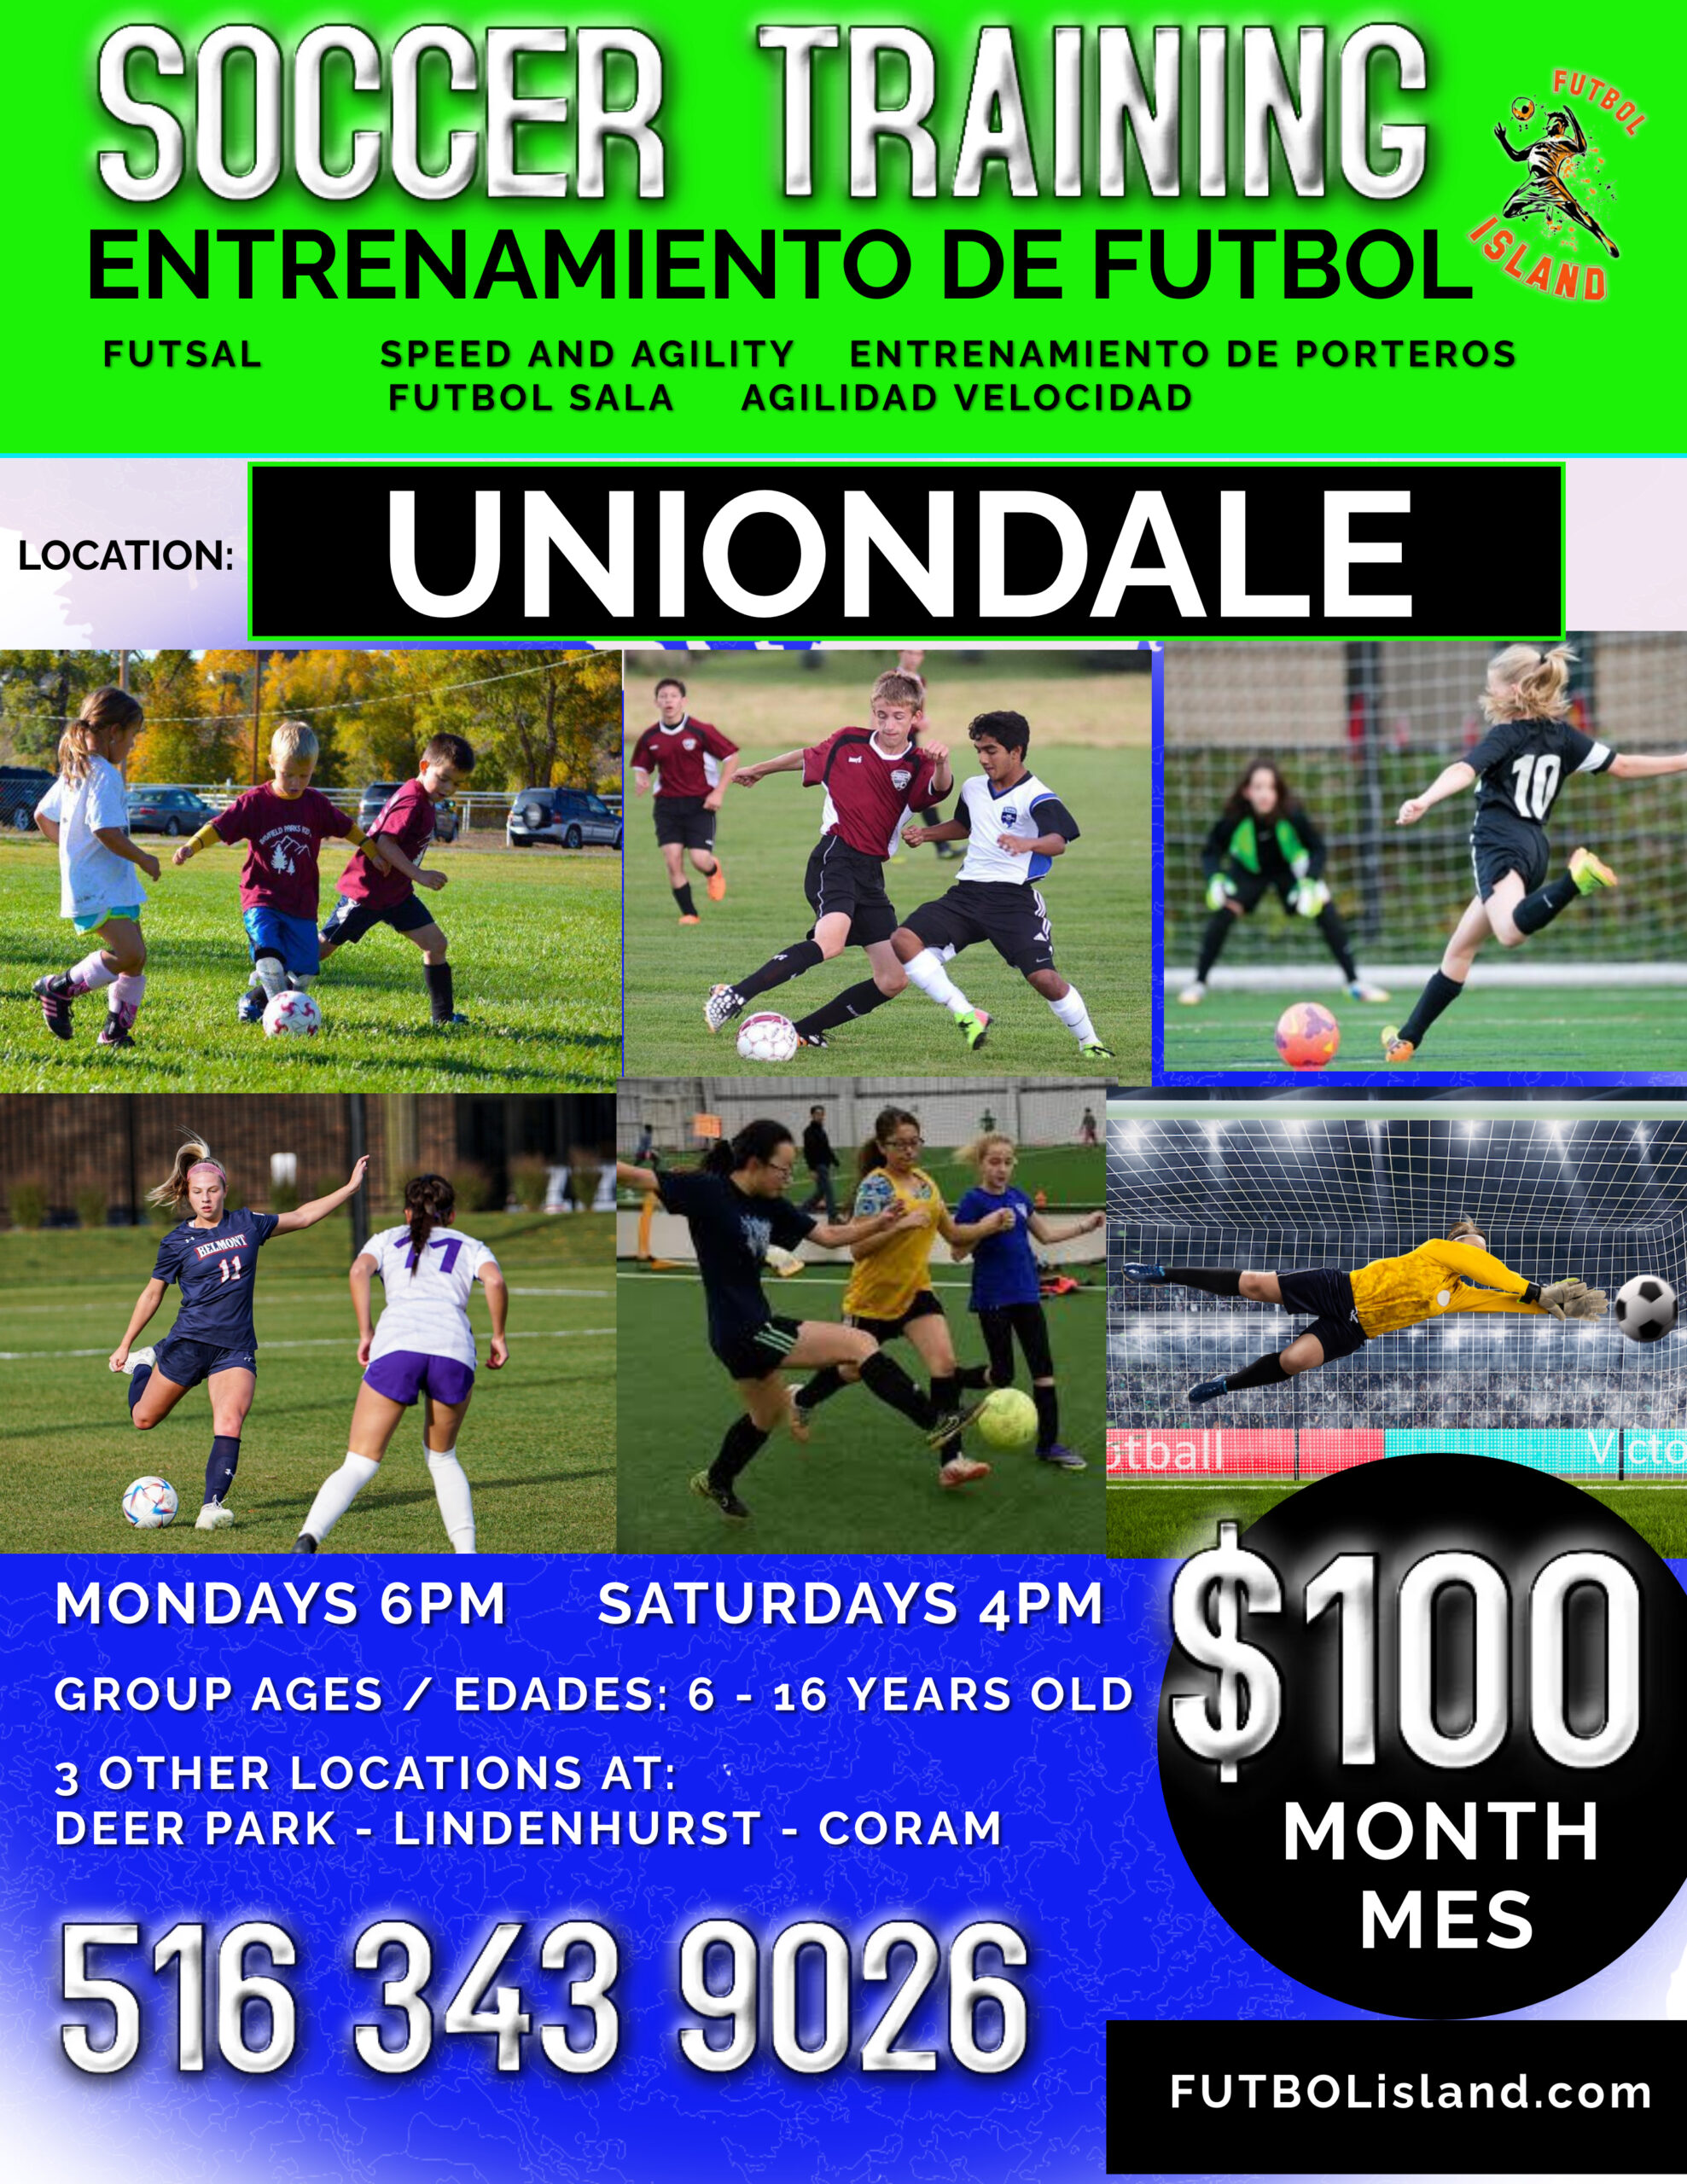 SOCCER ACADEMY UNIONDALE